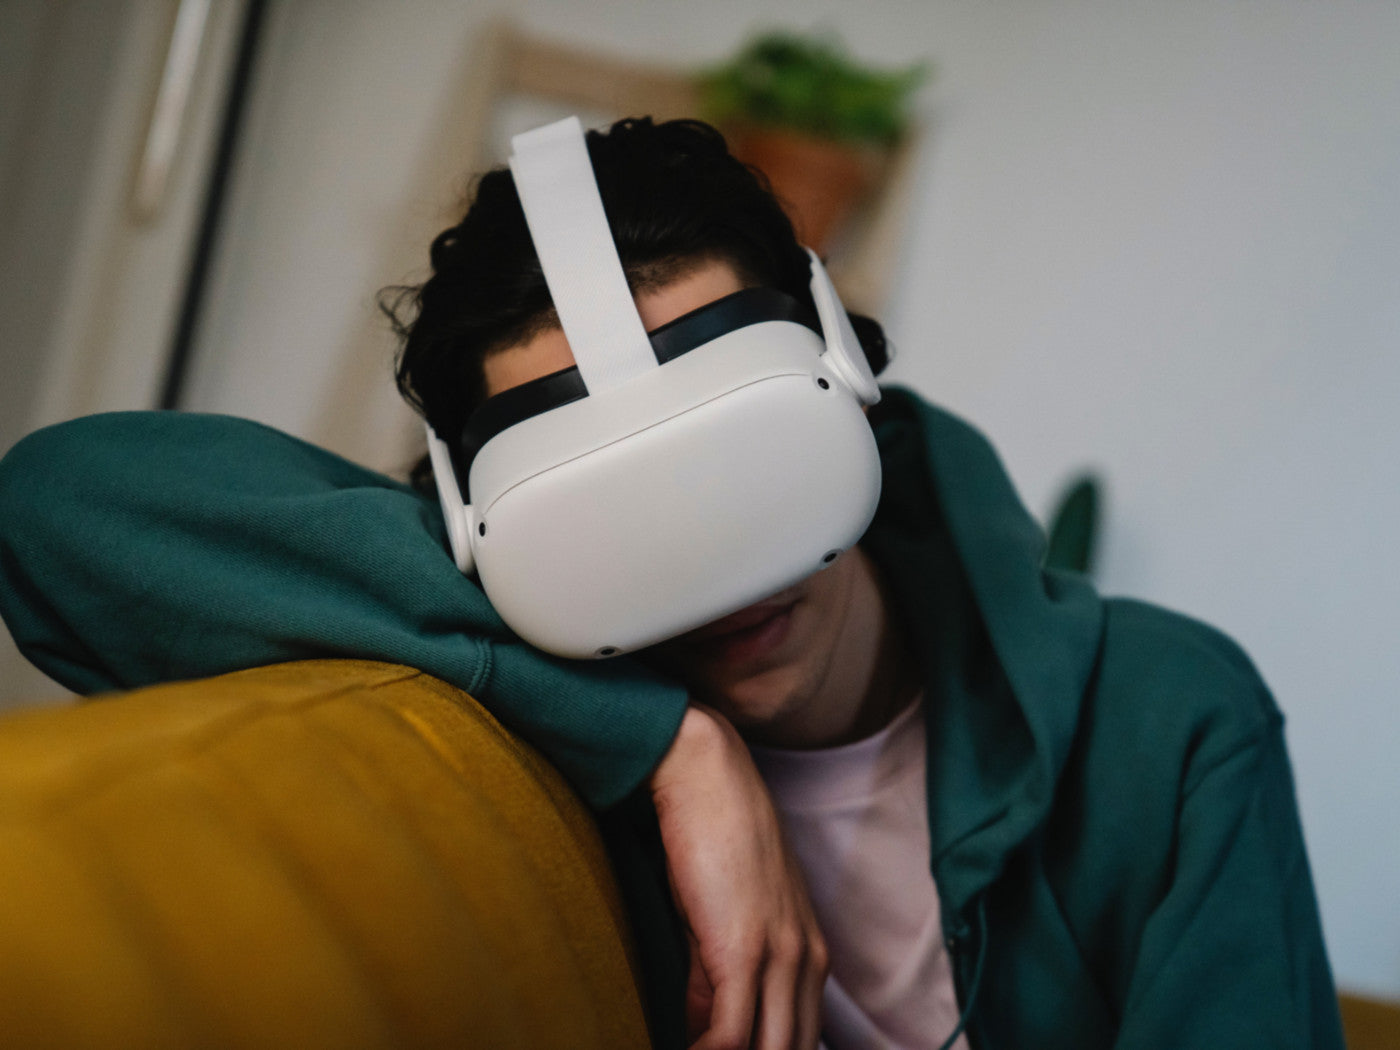 Is It Okay To Sleep While Wearing Your VR Headset?